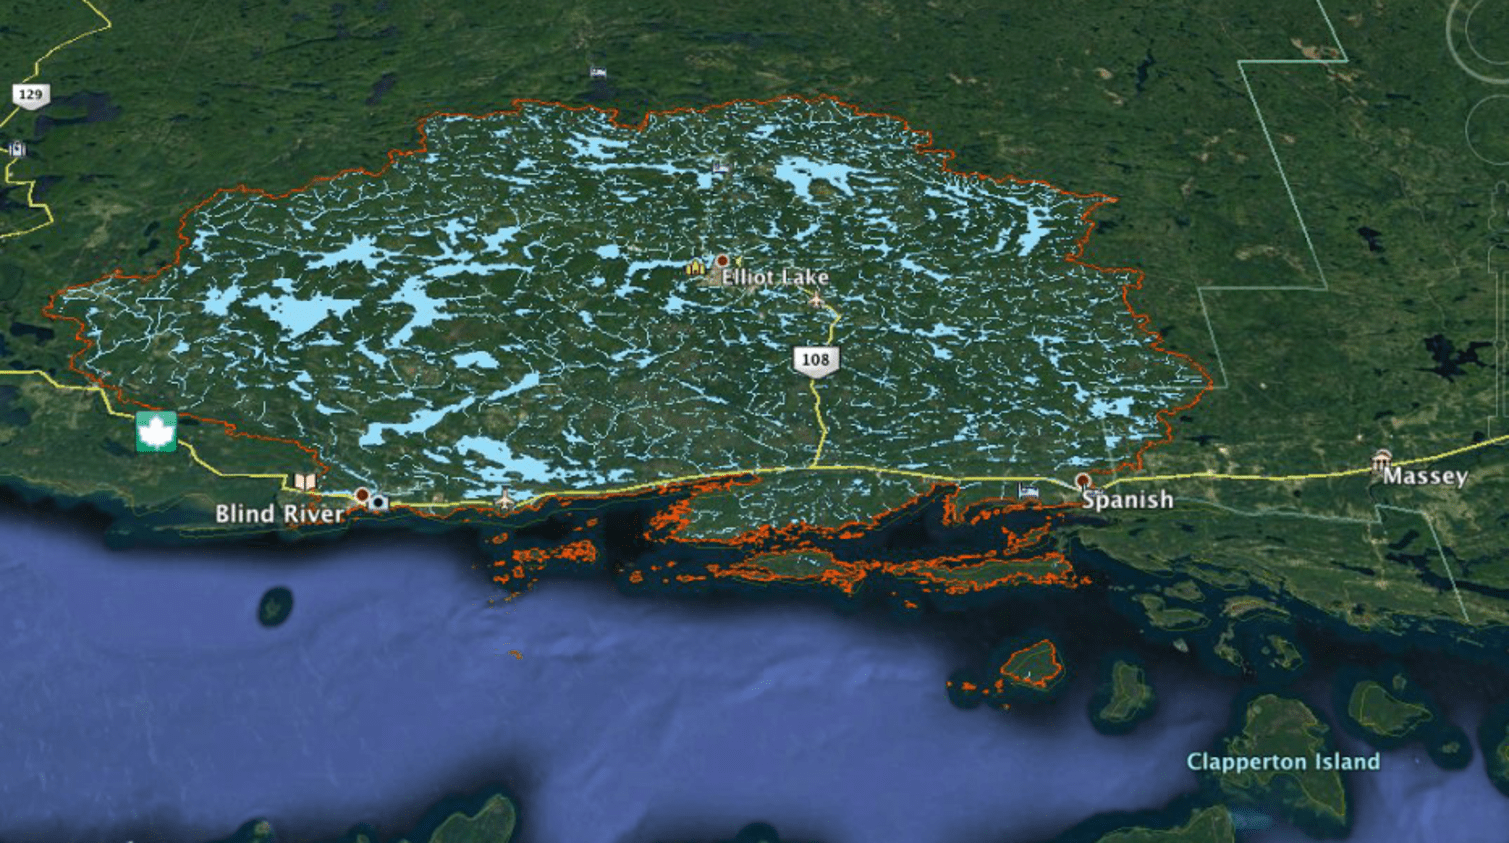 Areal map of the north shore of Lake Huron around Elliot Lake.